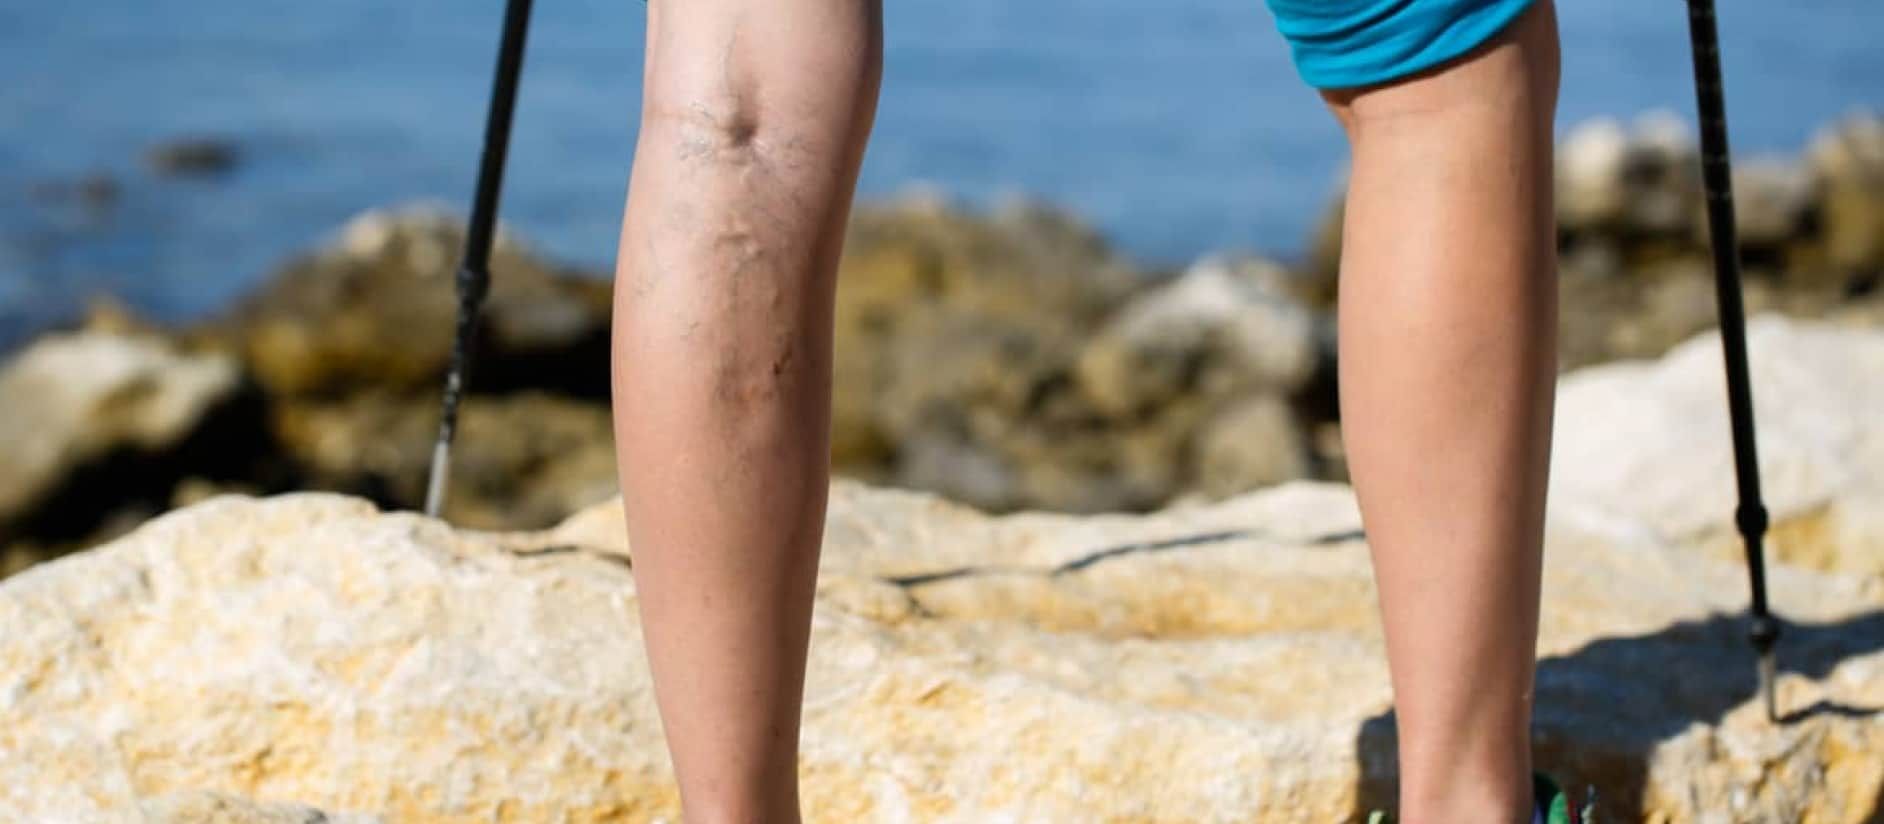 man with varicose veins may seek treatment from specialist